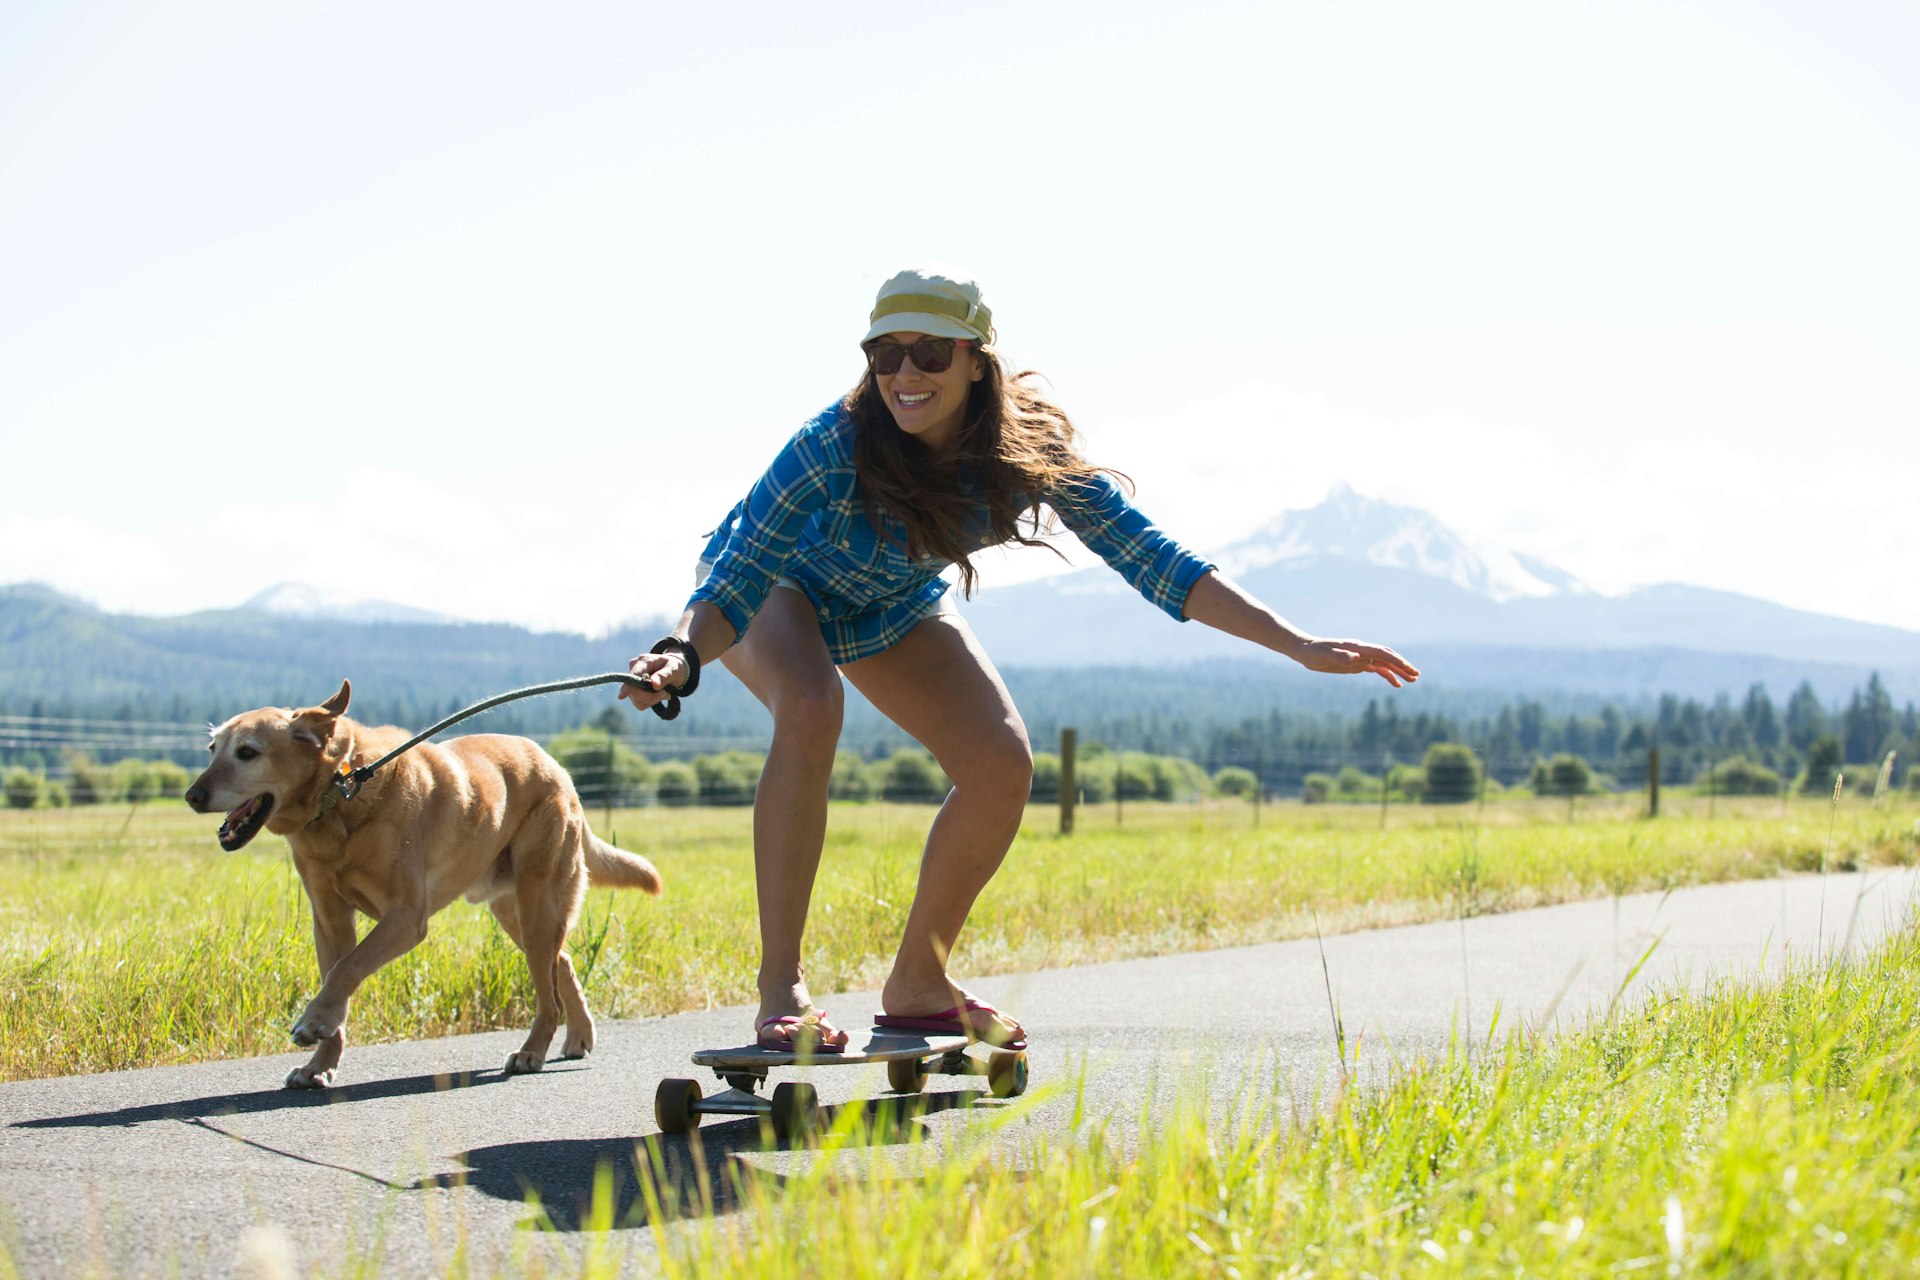 A woman skateboarding with her dog pulling her and a big mountain visible behind them